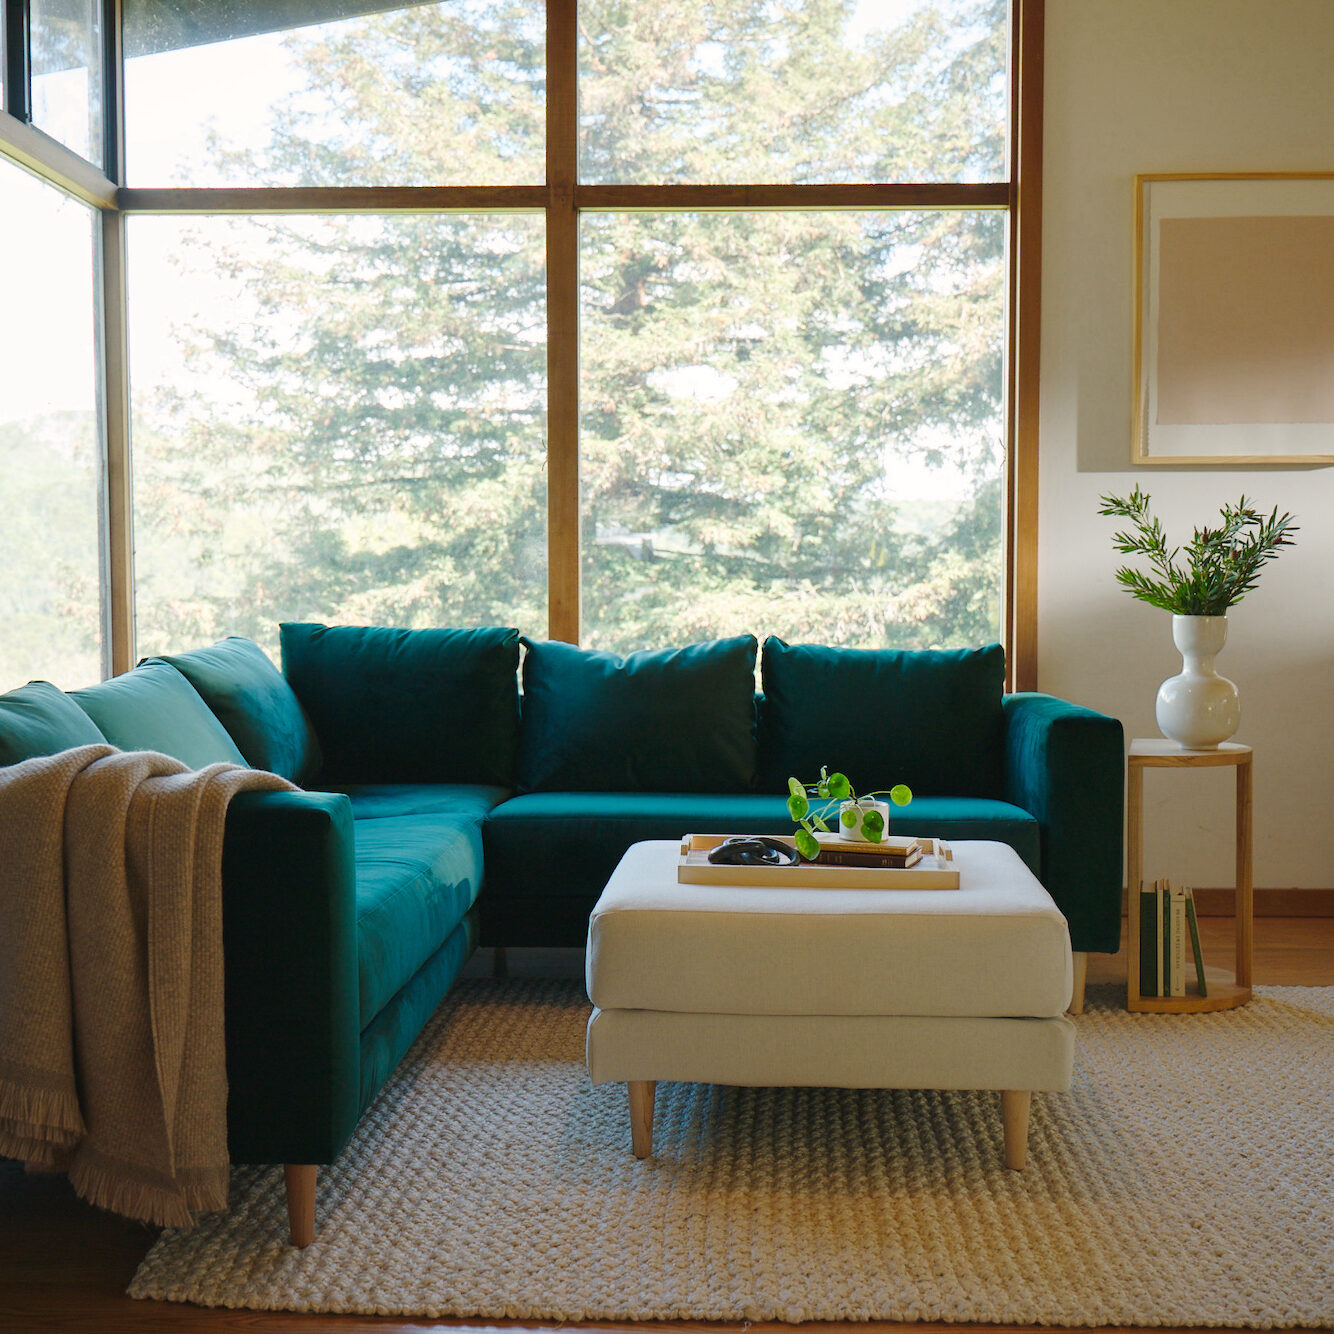 A Sabai sofa in a styled living room.